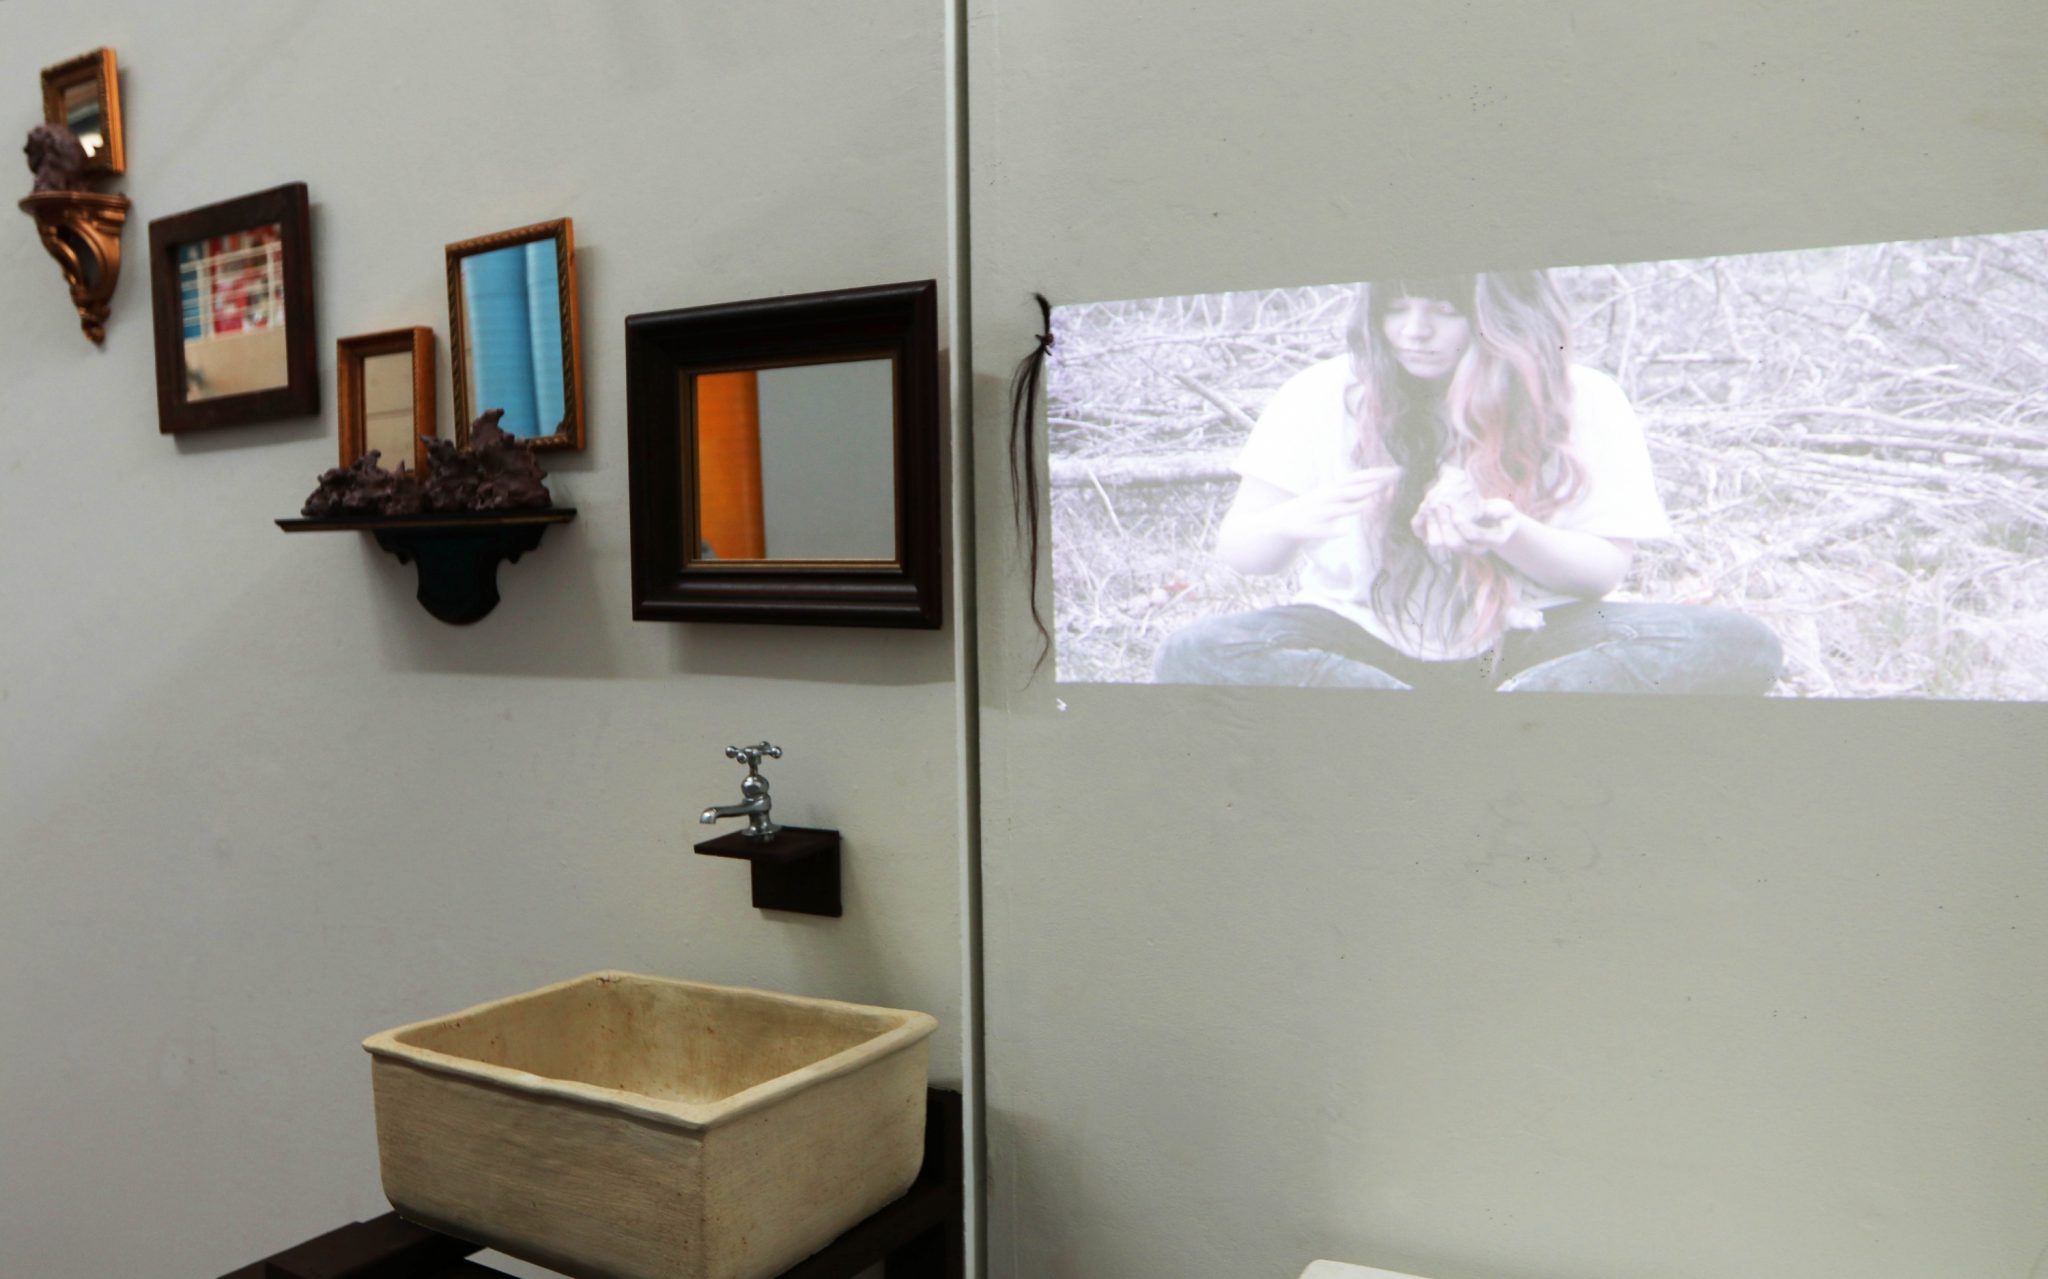 A photo of art from "Age Ingrained" showing an old bathroom vanity